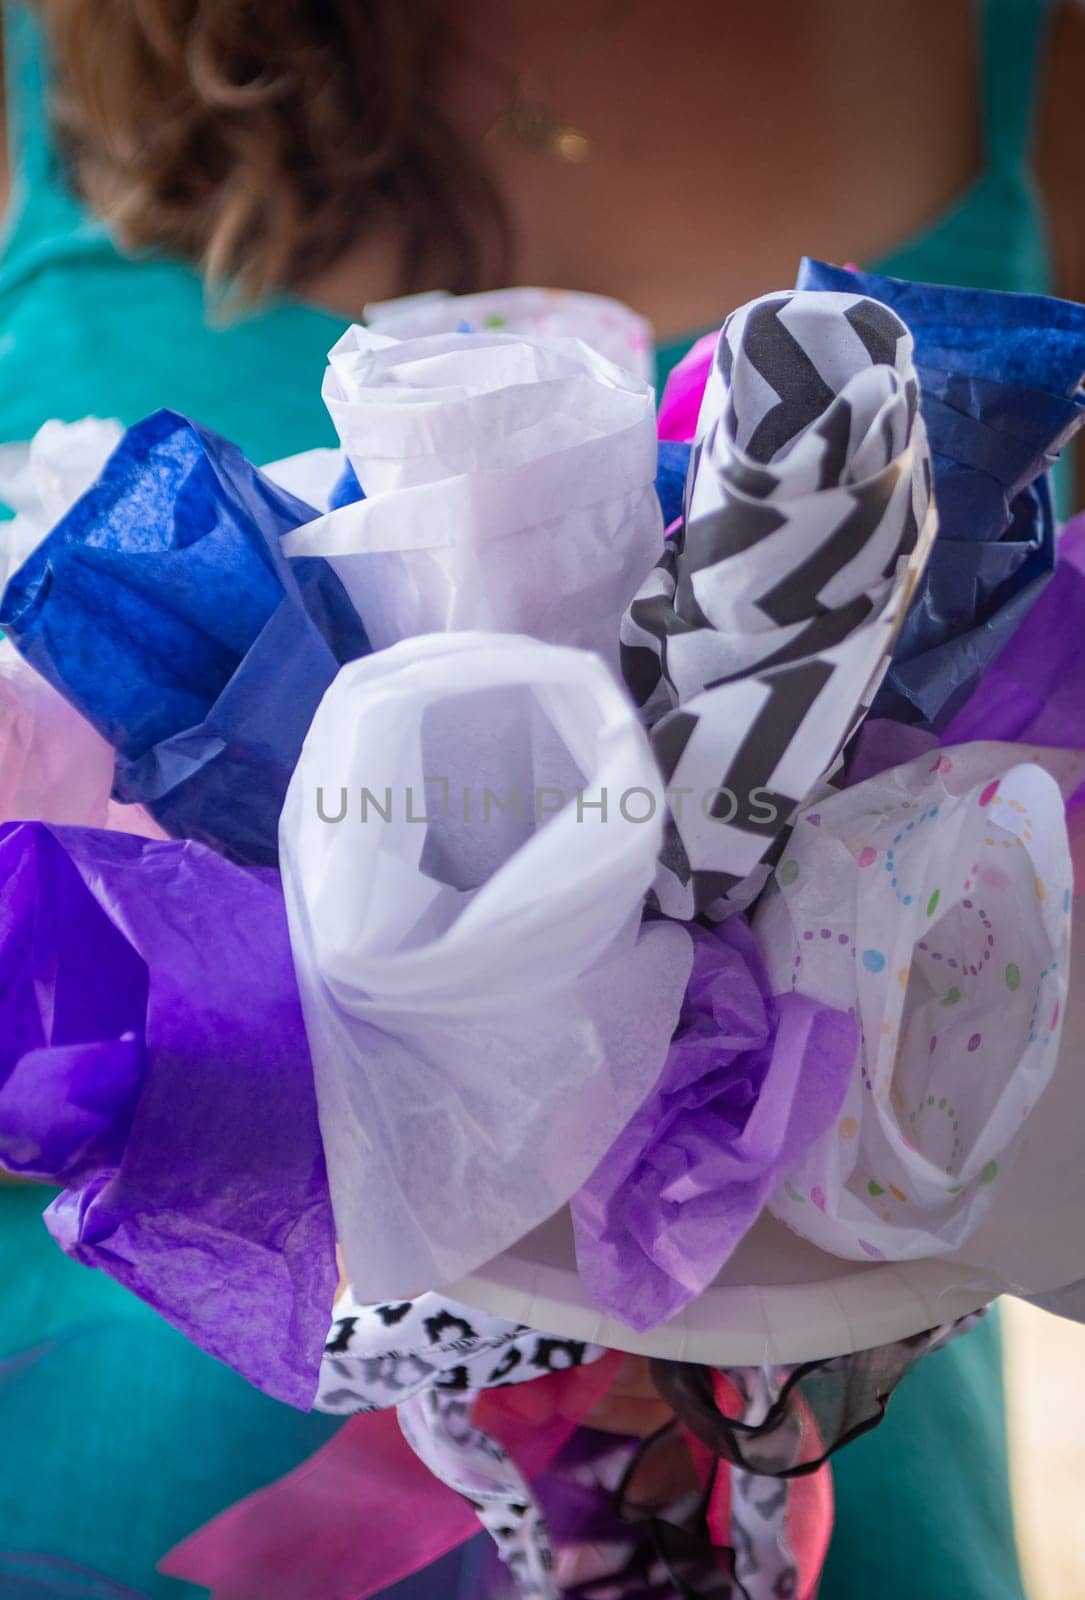 Tissue Bouquet for a bridal shower in different colors and patterns